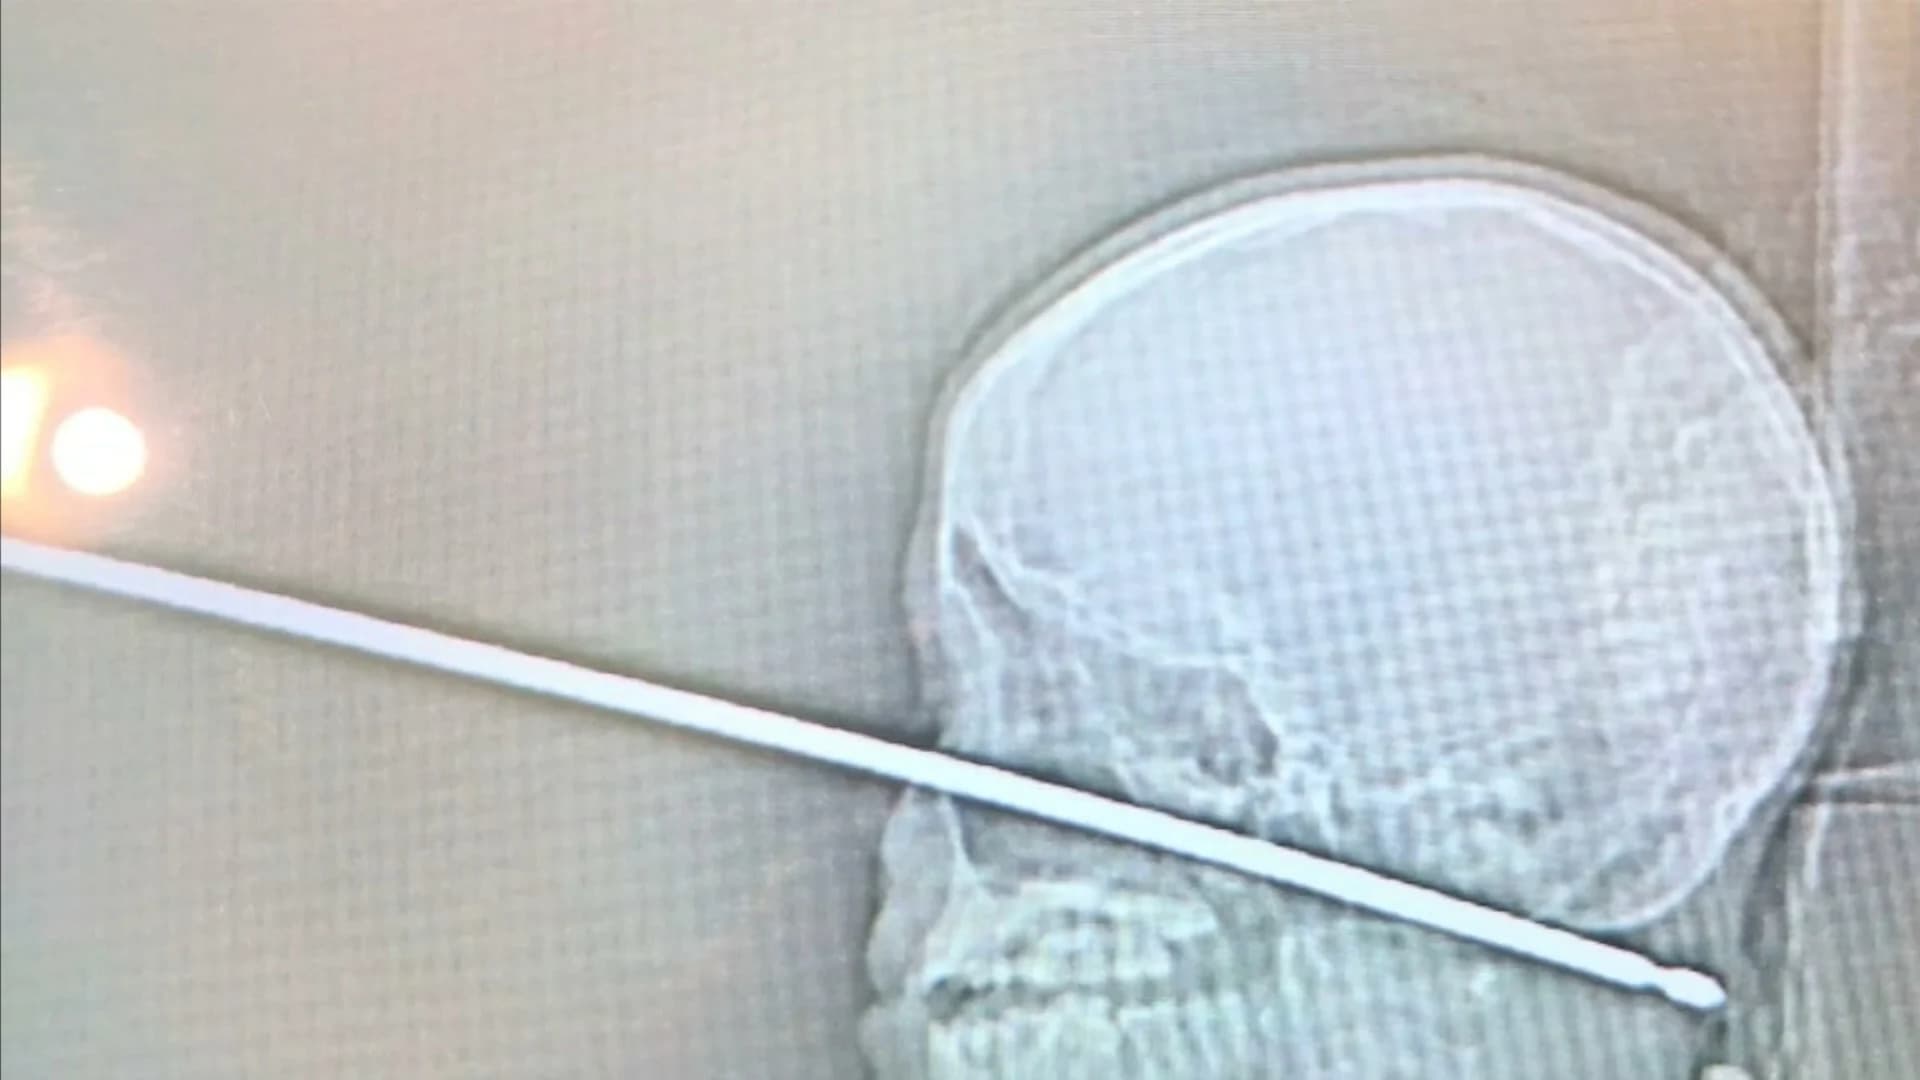 Boy survives face-first fall from tree house onto metal meat skewer